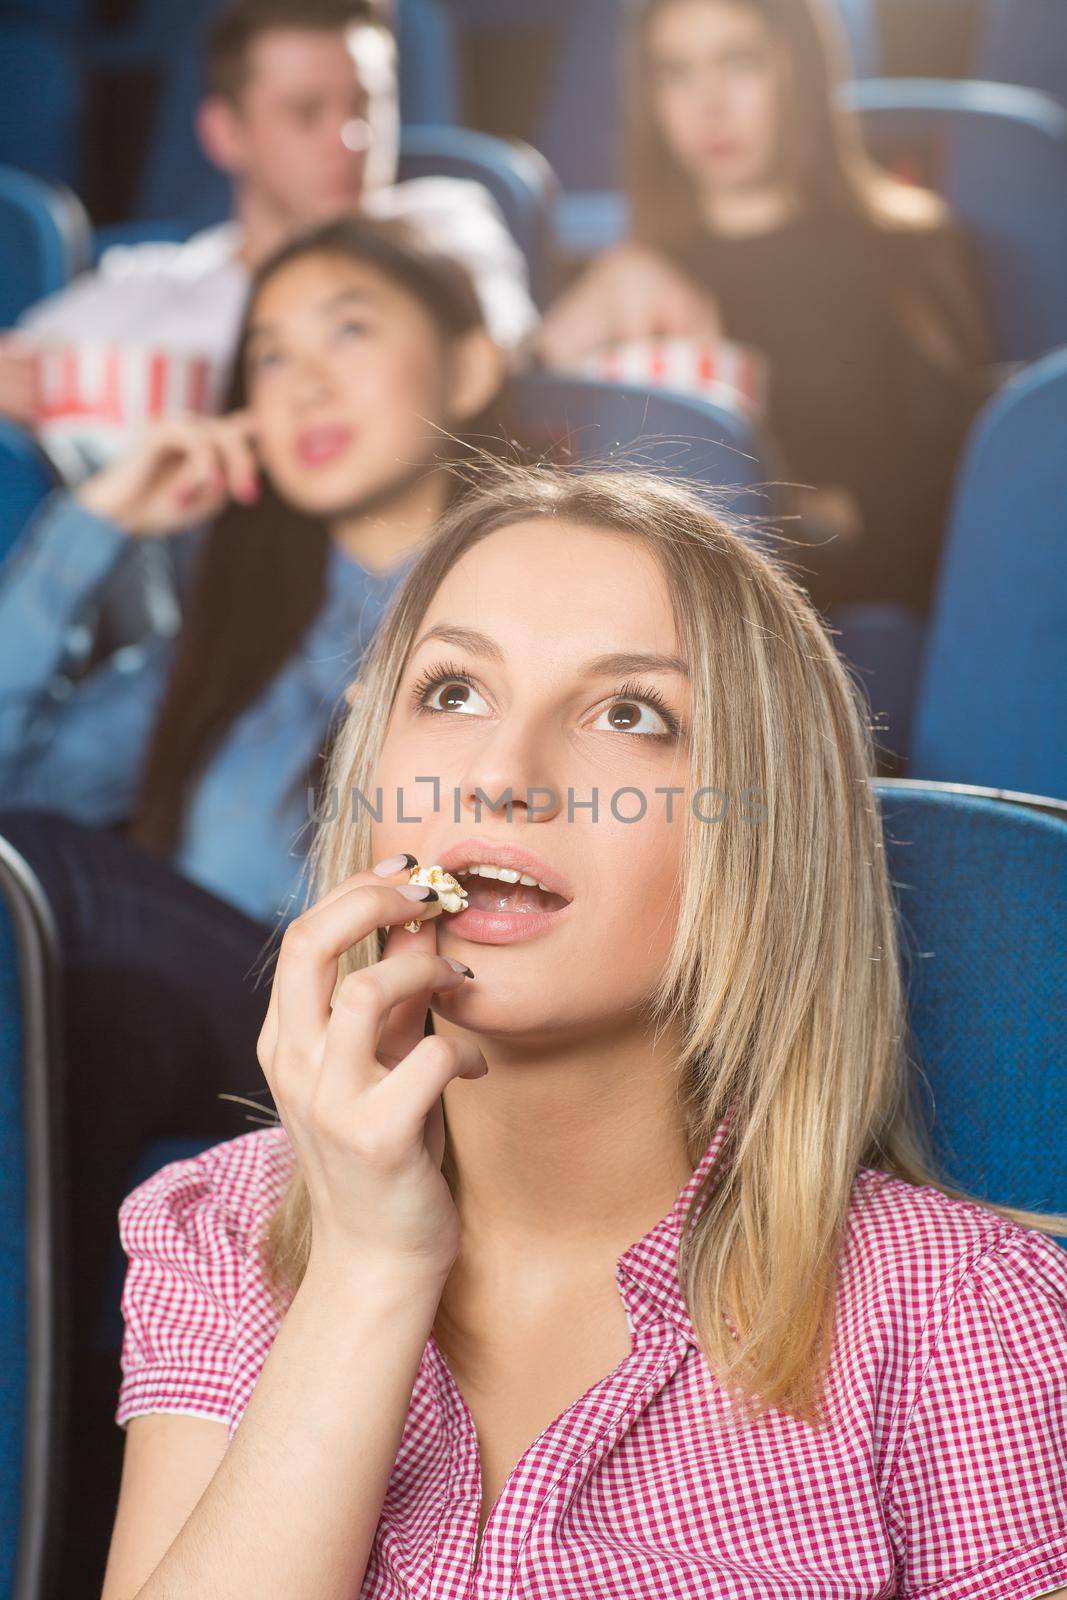 New favorite movie. Vertical shot of a joyful woman eating popcorn watching an interesting movie at the cinema